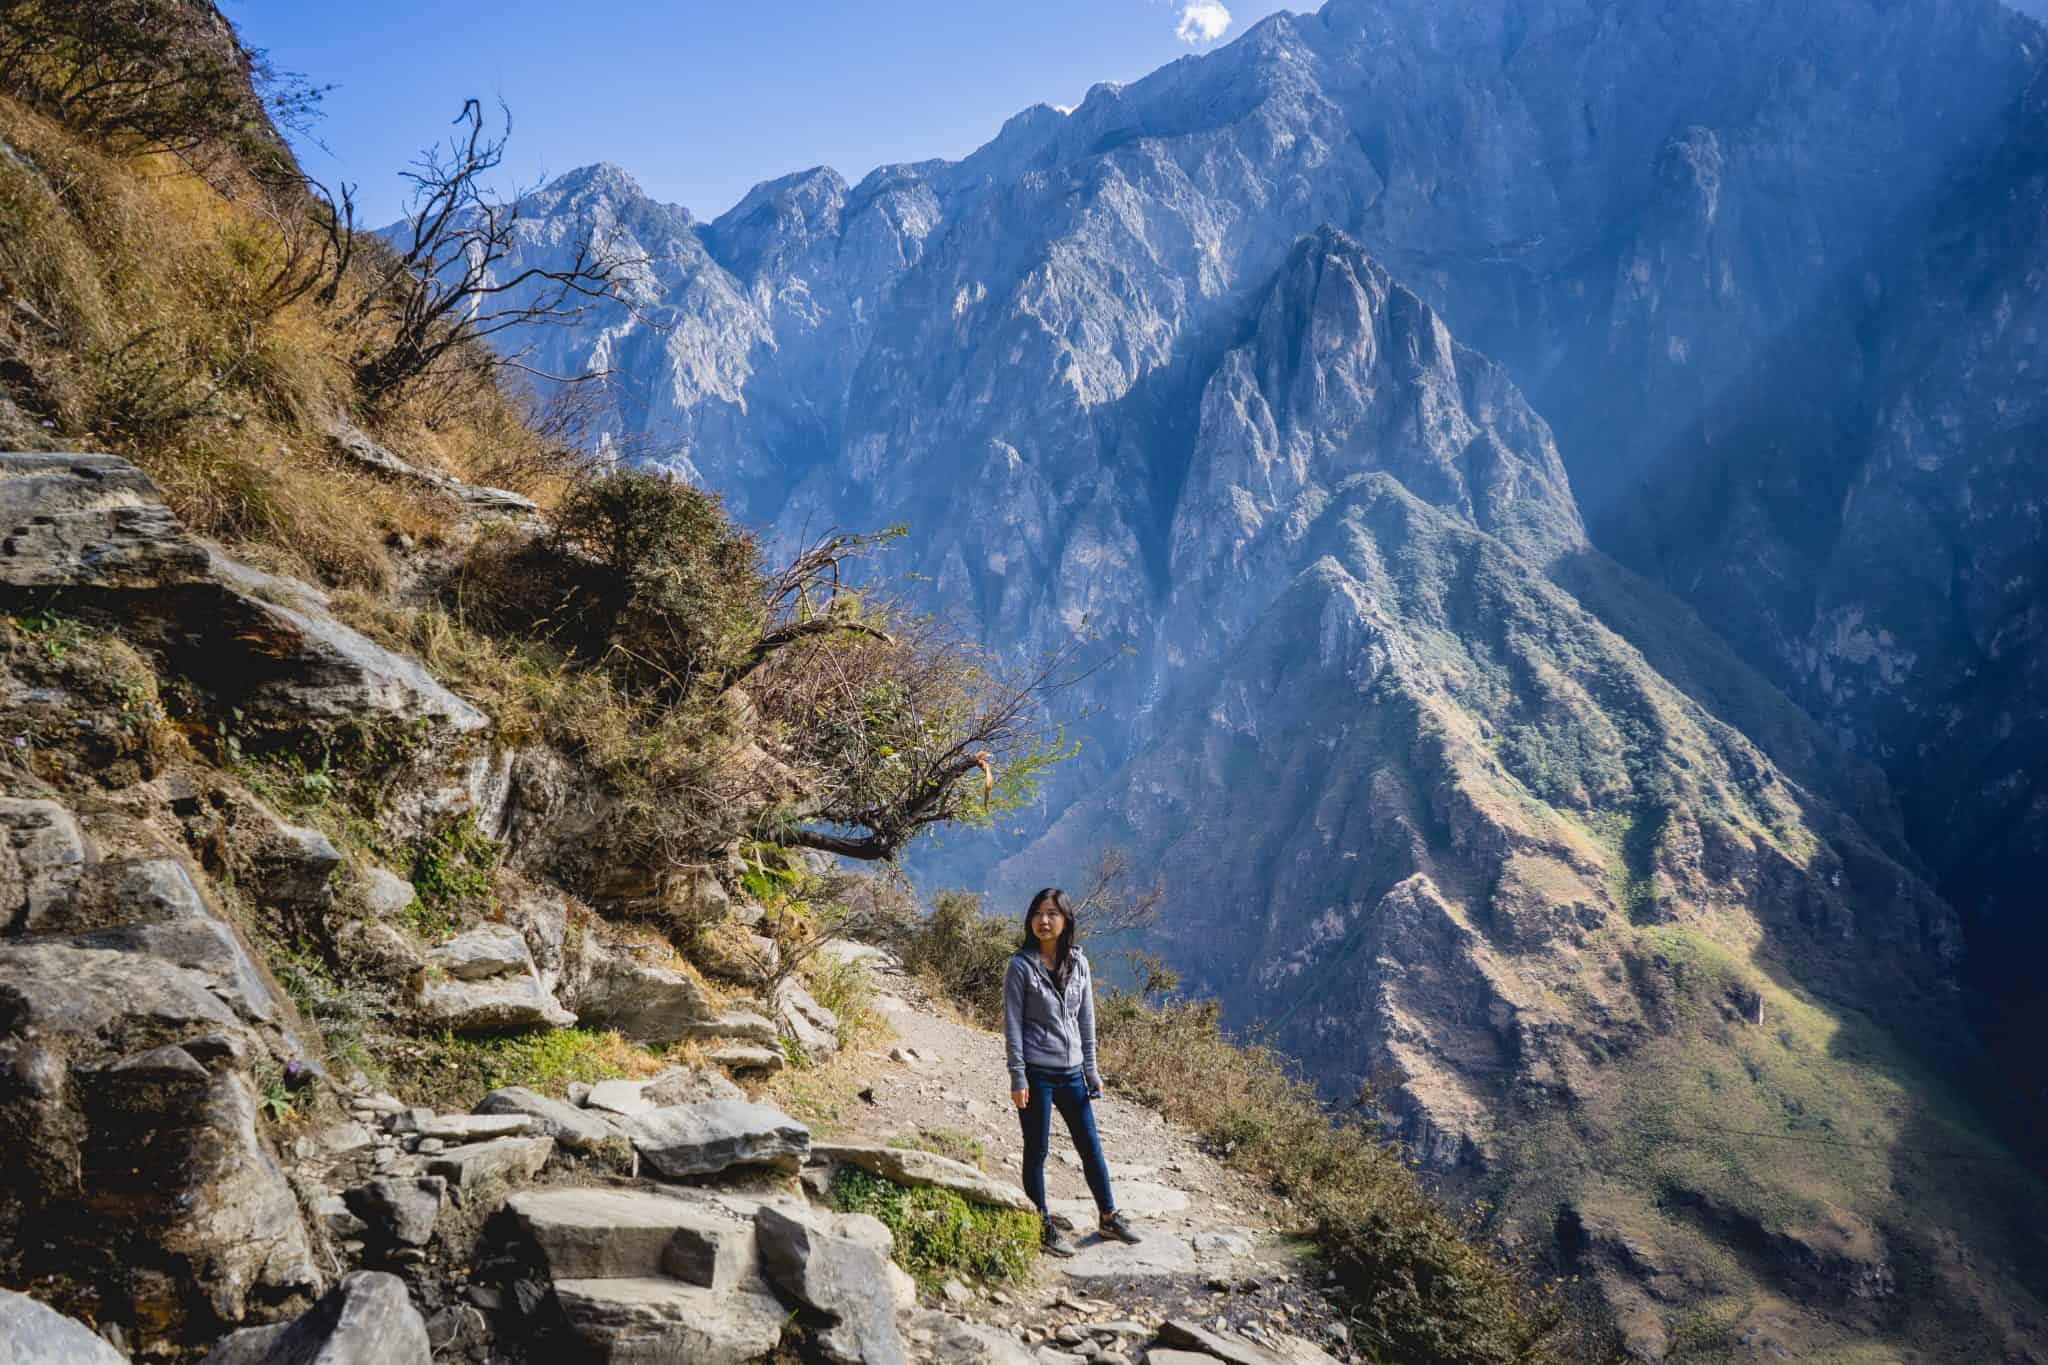 hiking the Tiger Leaping Gorge in Yunnan province, China 